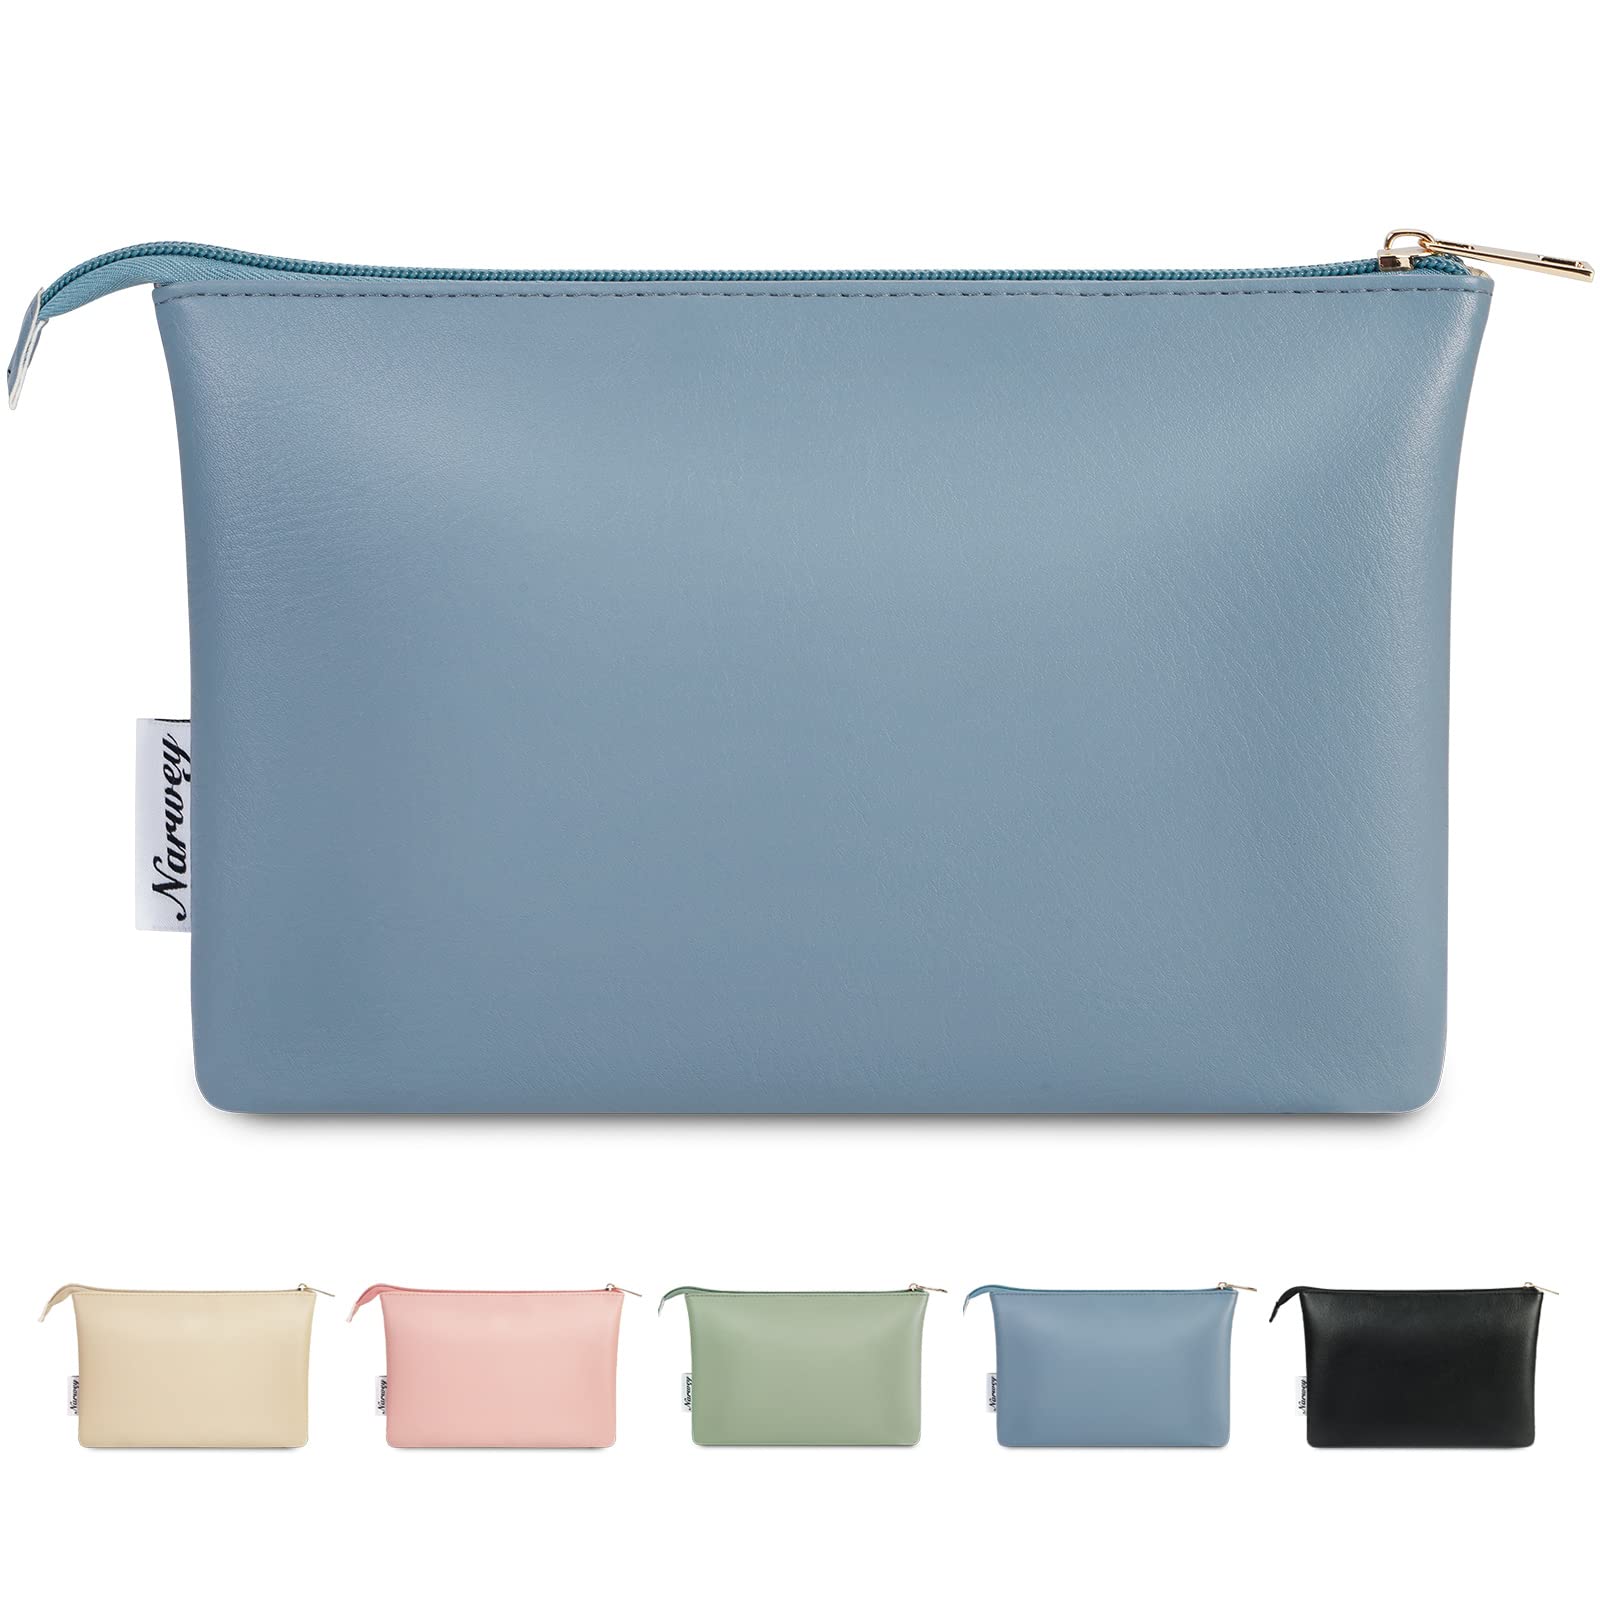 Elicia Travel Cosmetic Bag | The Royal Standard